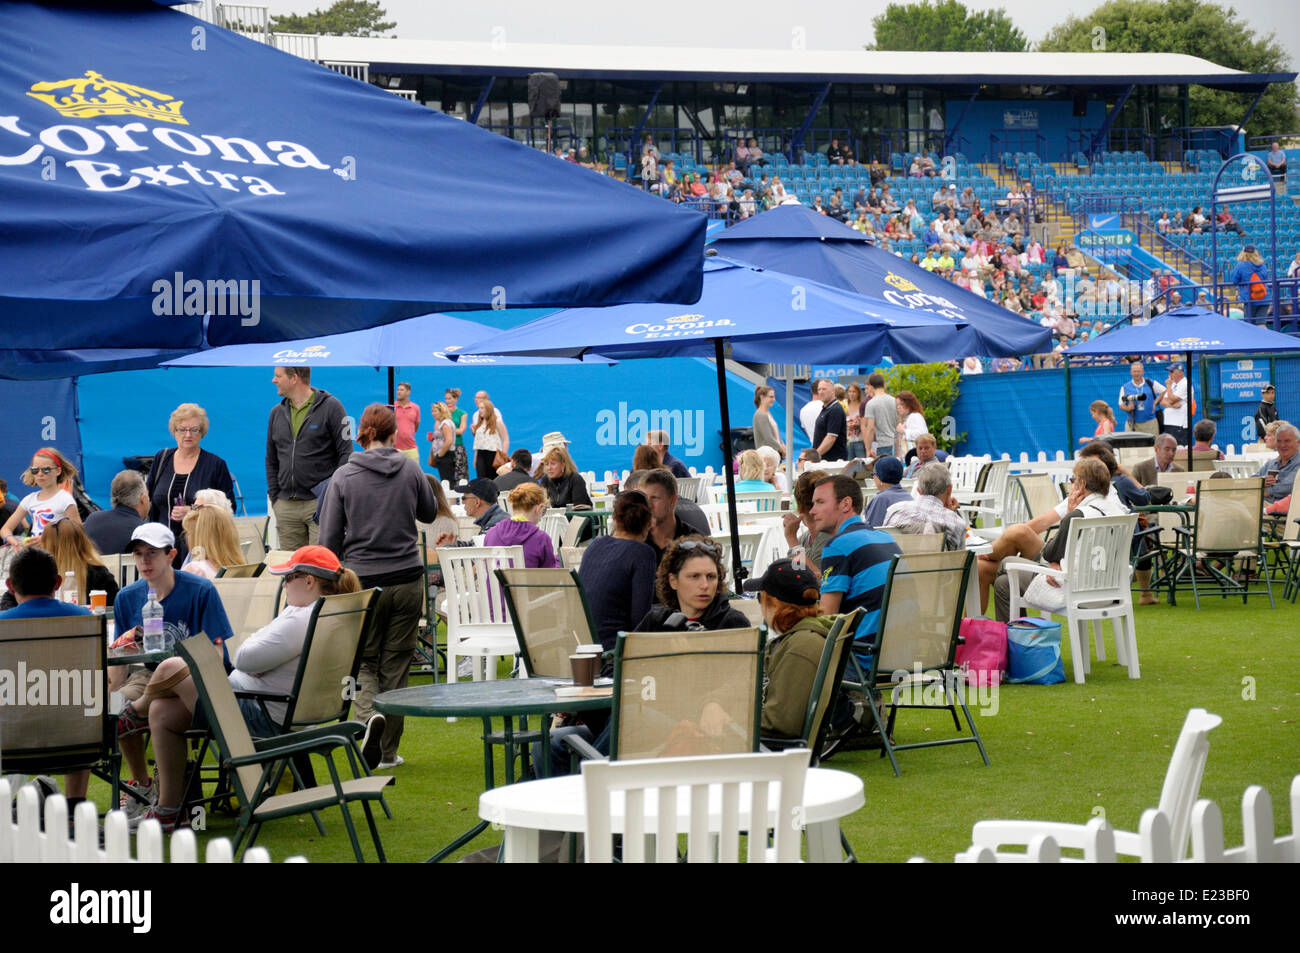 Eastbourne, UK. 14th June, 2014. Aegon International Tennis. Spectators make the most of free entry to Family Day on the first Saturday of qualifying Stock Photo